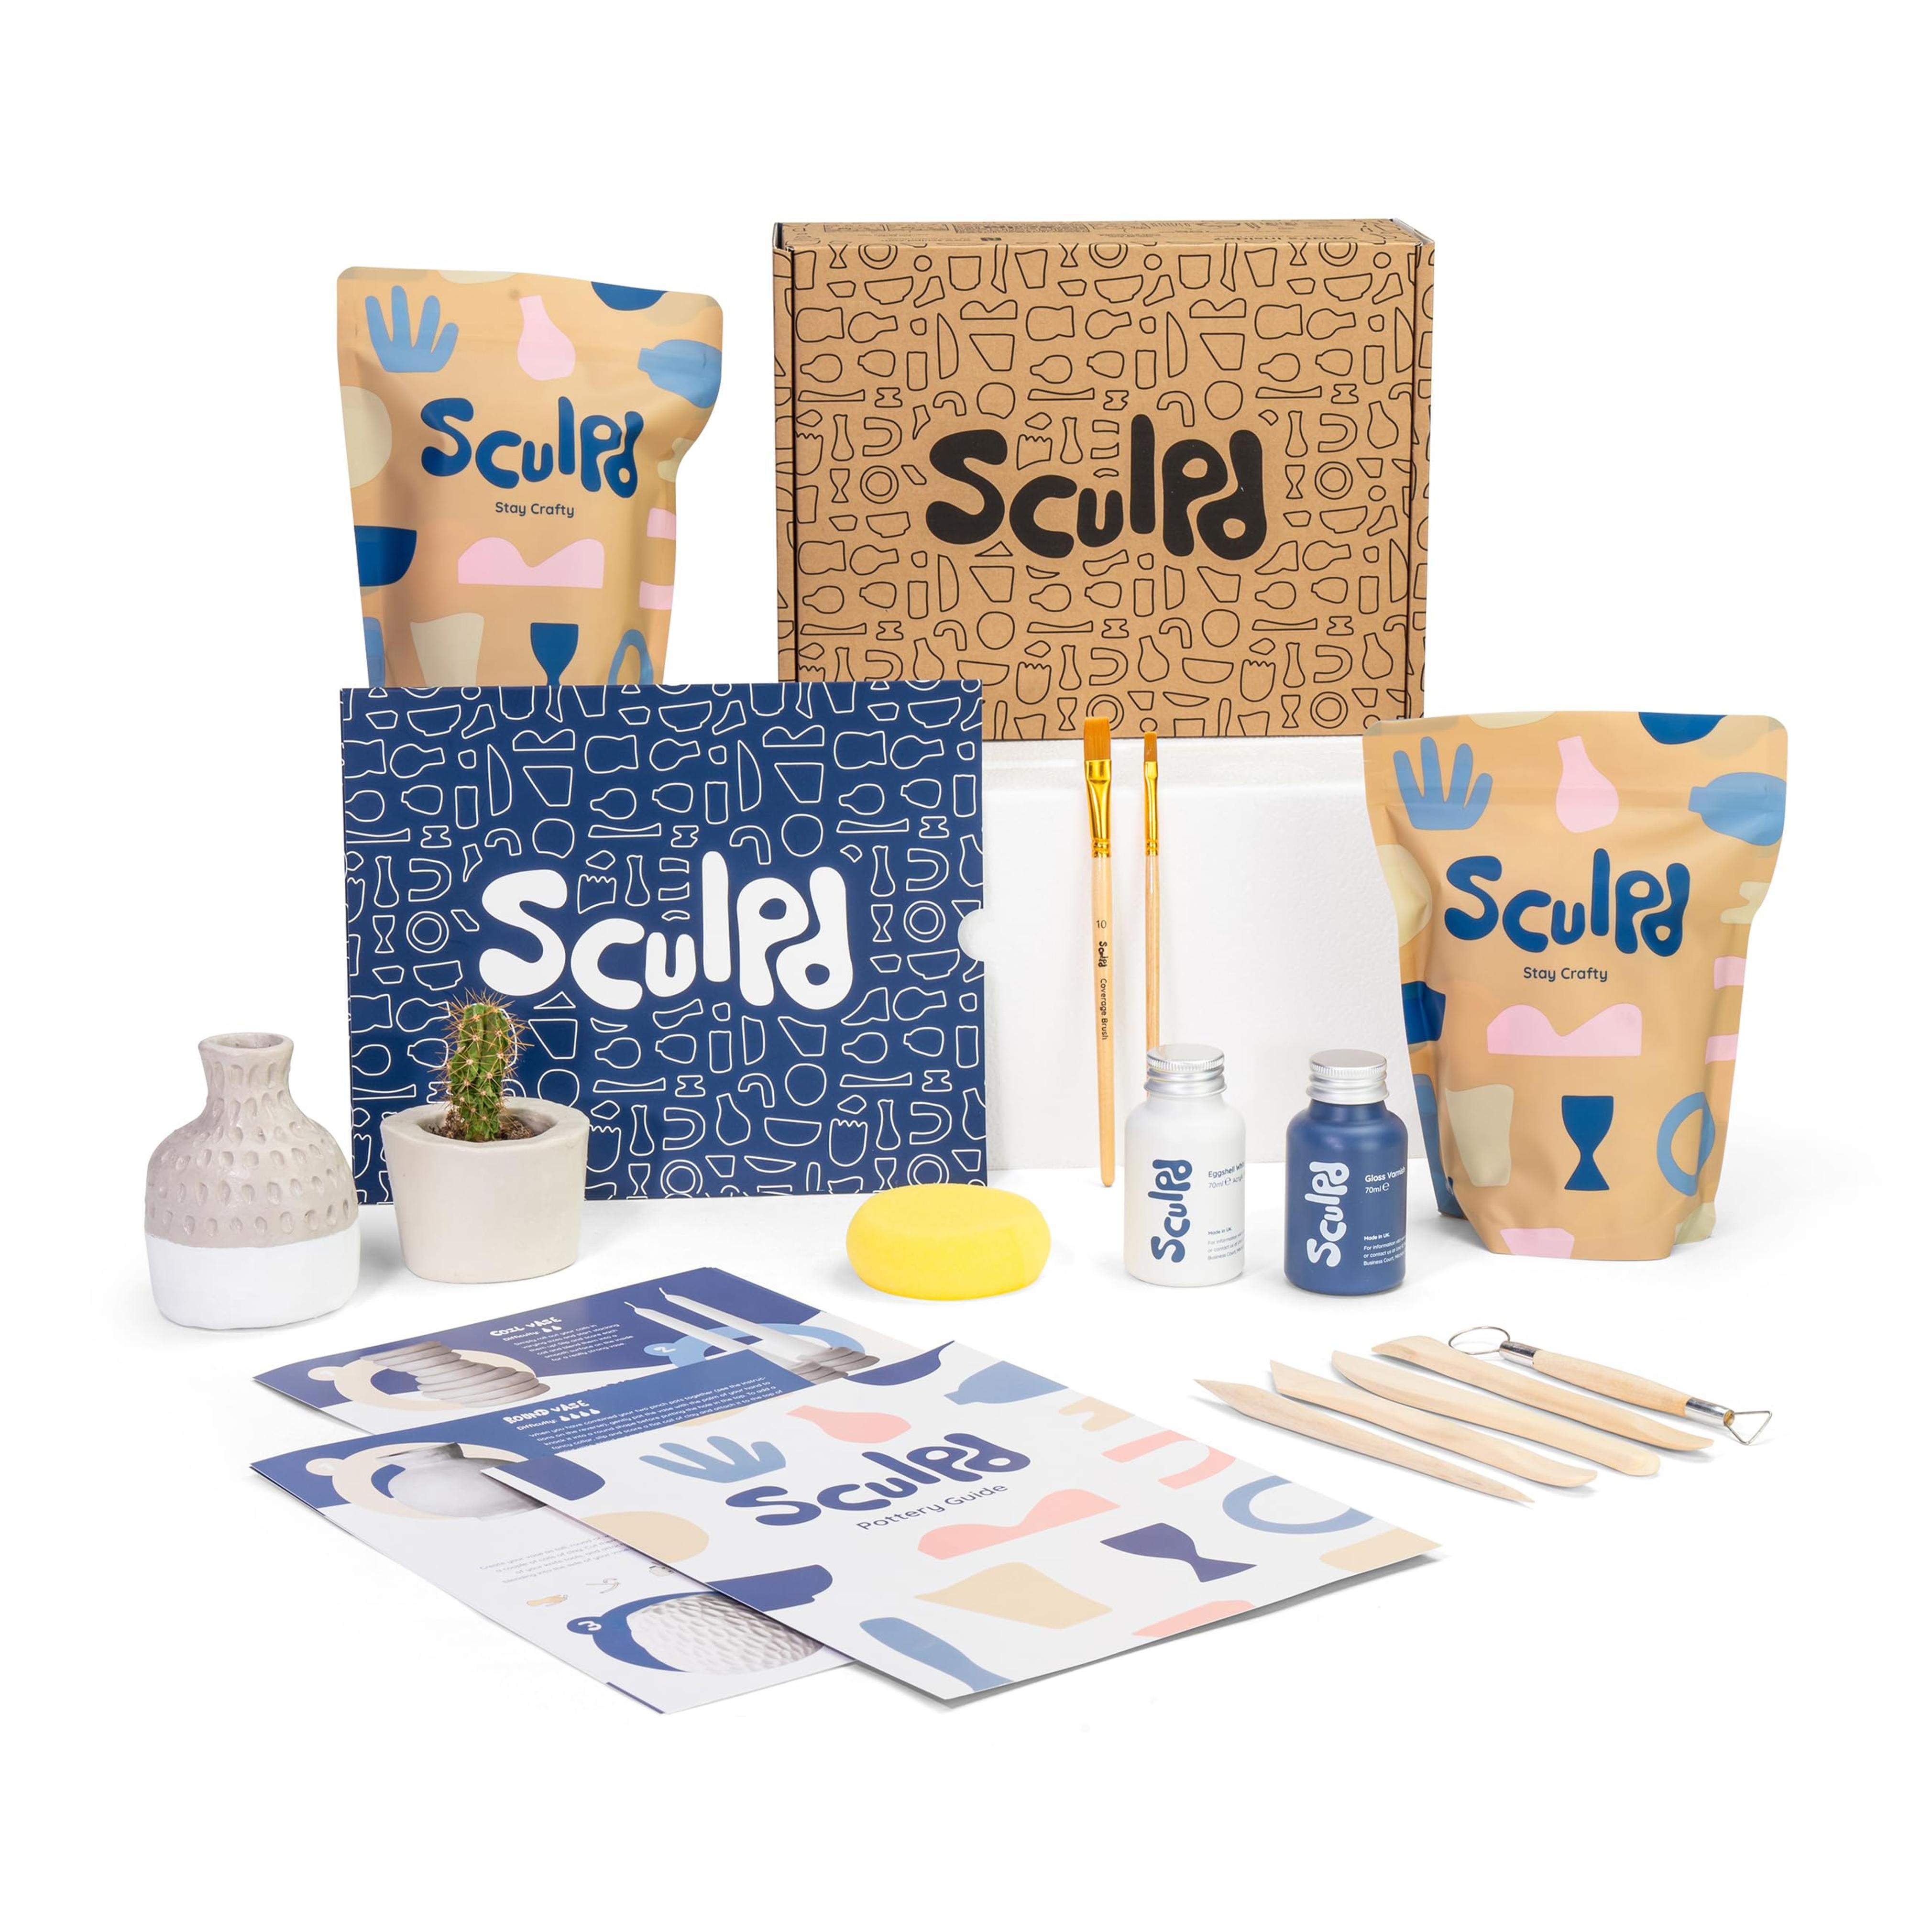 Sculpd Pottery Kit, Air Dry Clay Starter Kit for Beginners with Gloss Varnish, Pottery Kit for Two Includes Paint, Tool Set, Paintbrushes, Sponge and Step-by-Step Guide, Air Drying Clay Kit for Adults